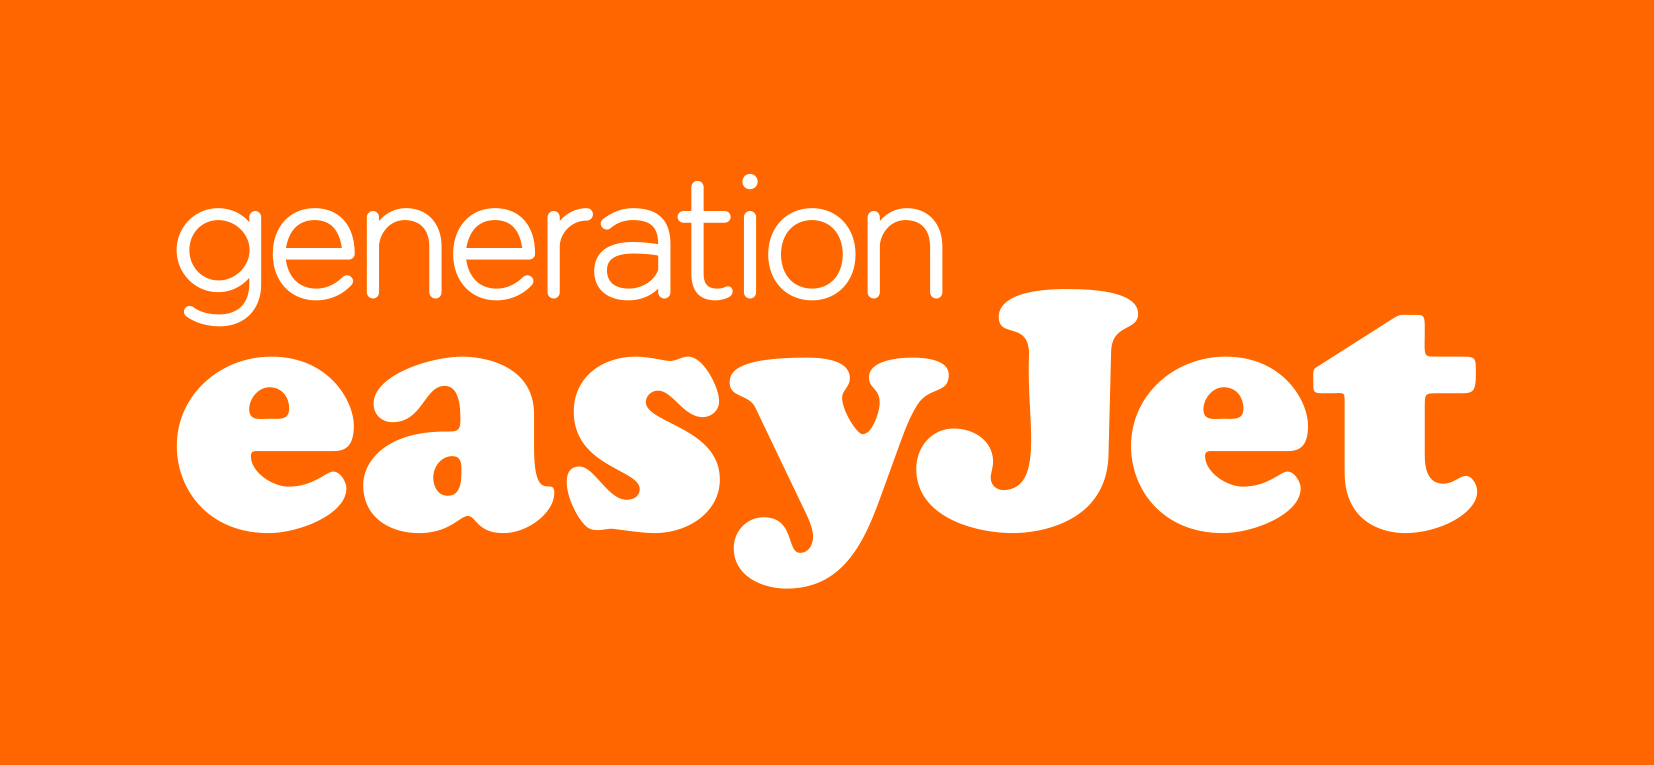 Easyjet airline Free vector 2